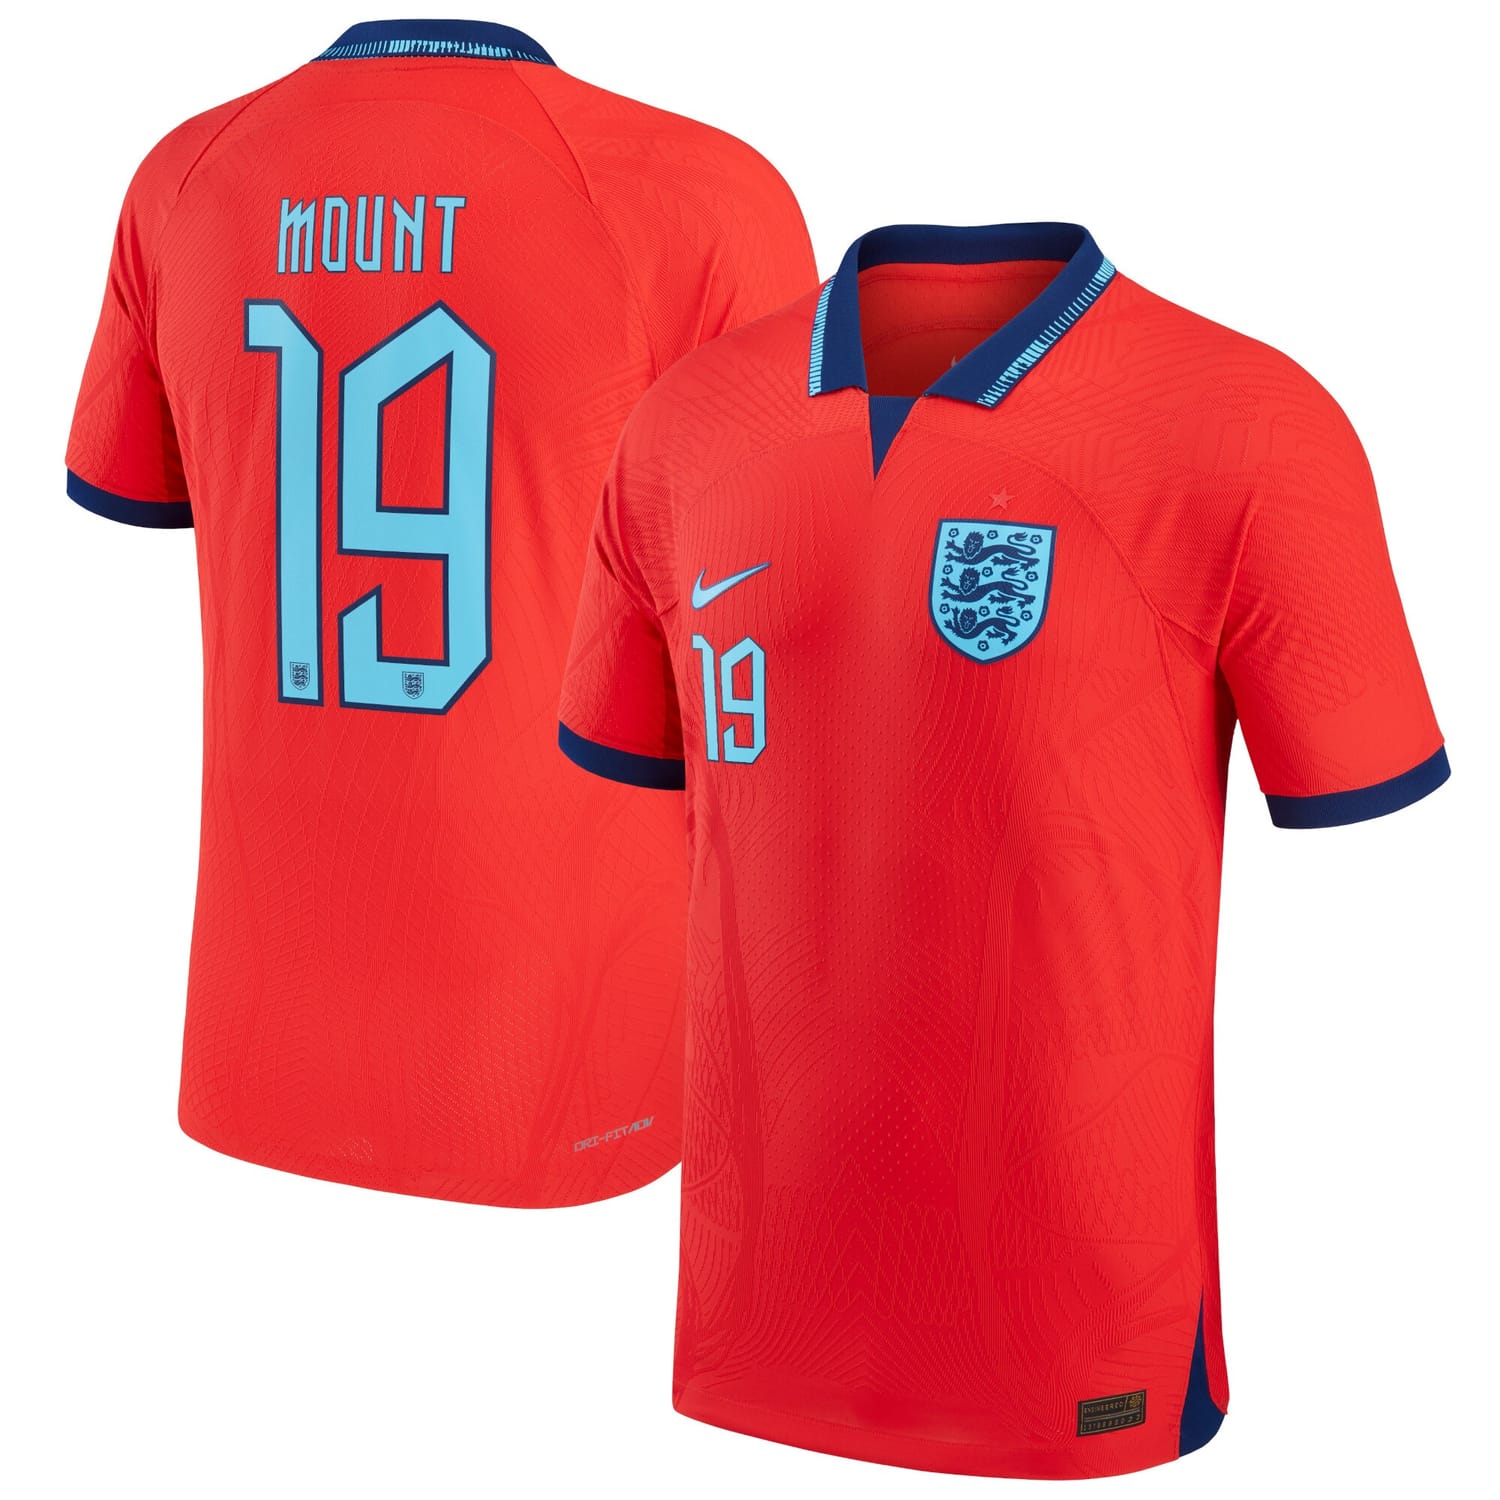 England National Team Away Authentic Jersey Shirt 2022 player Mason Mount 19 printing for Men